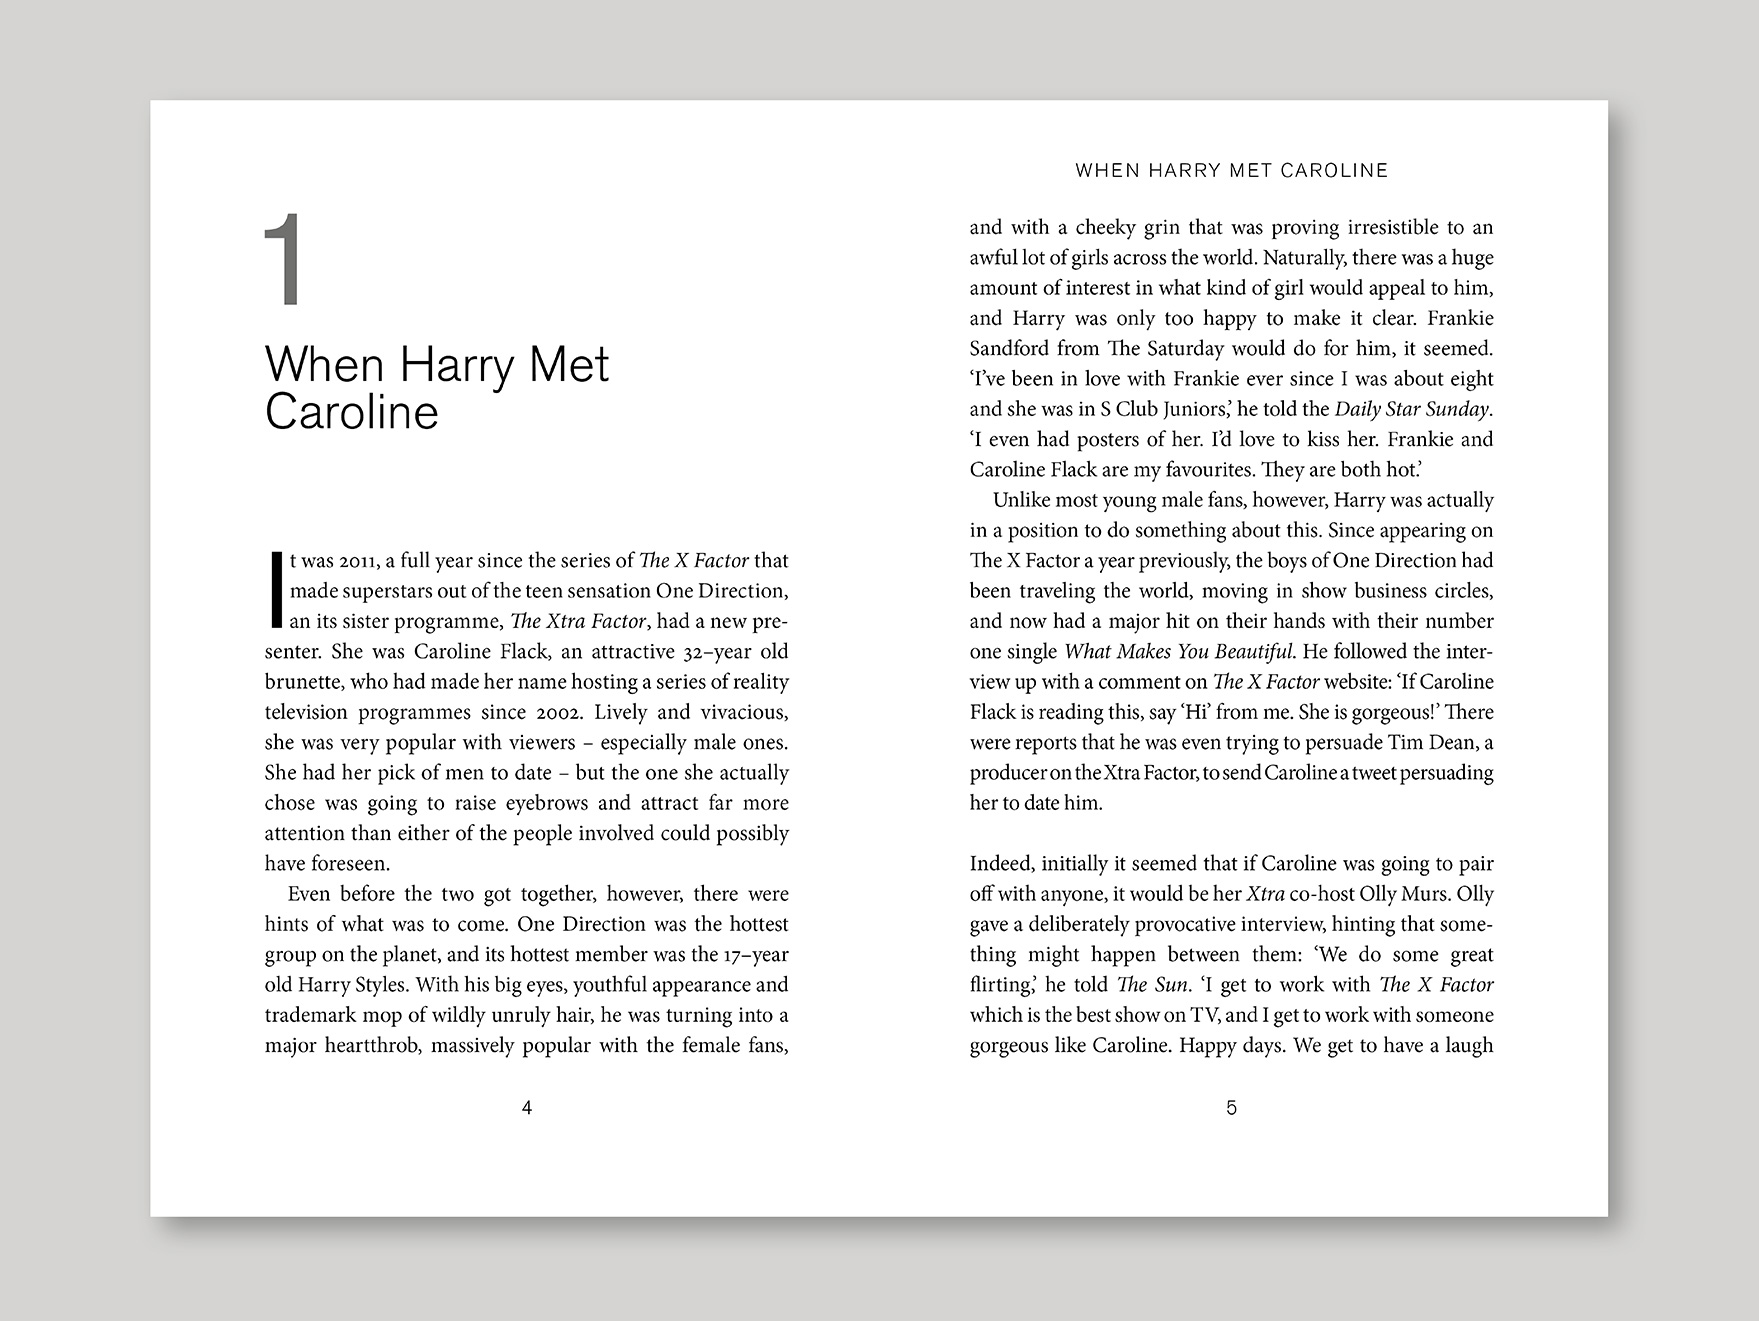 Inside typeset pages from a biography book